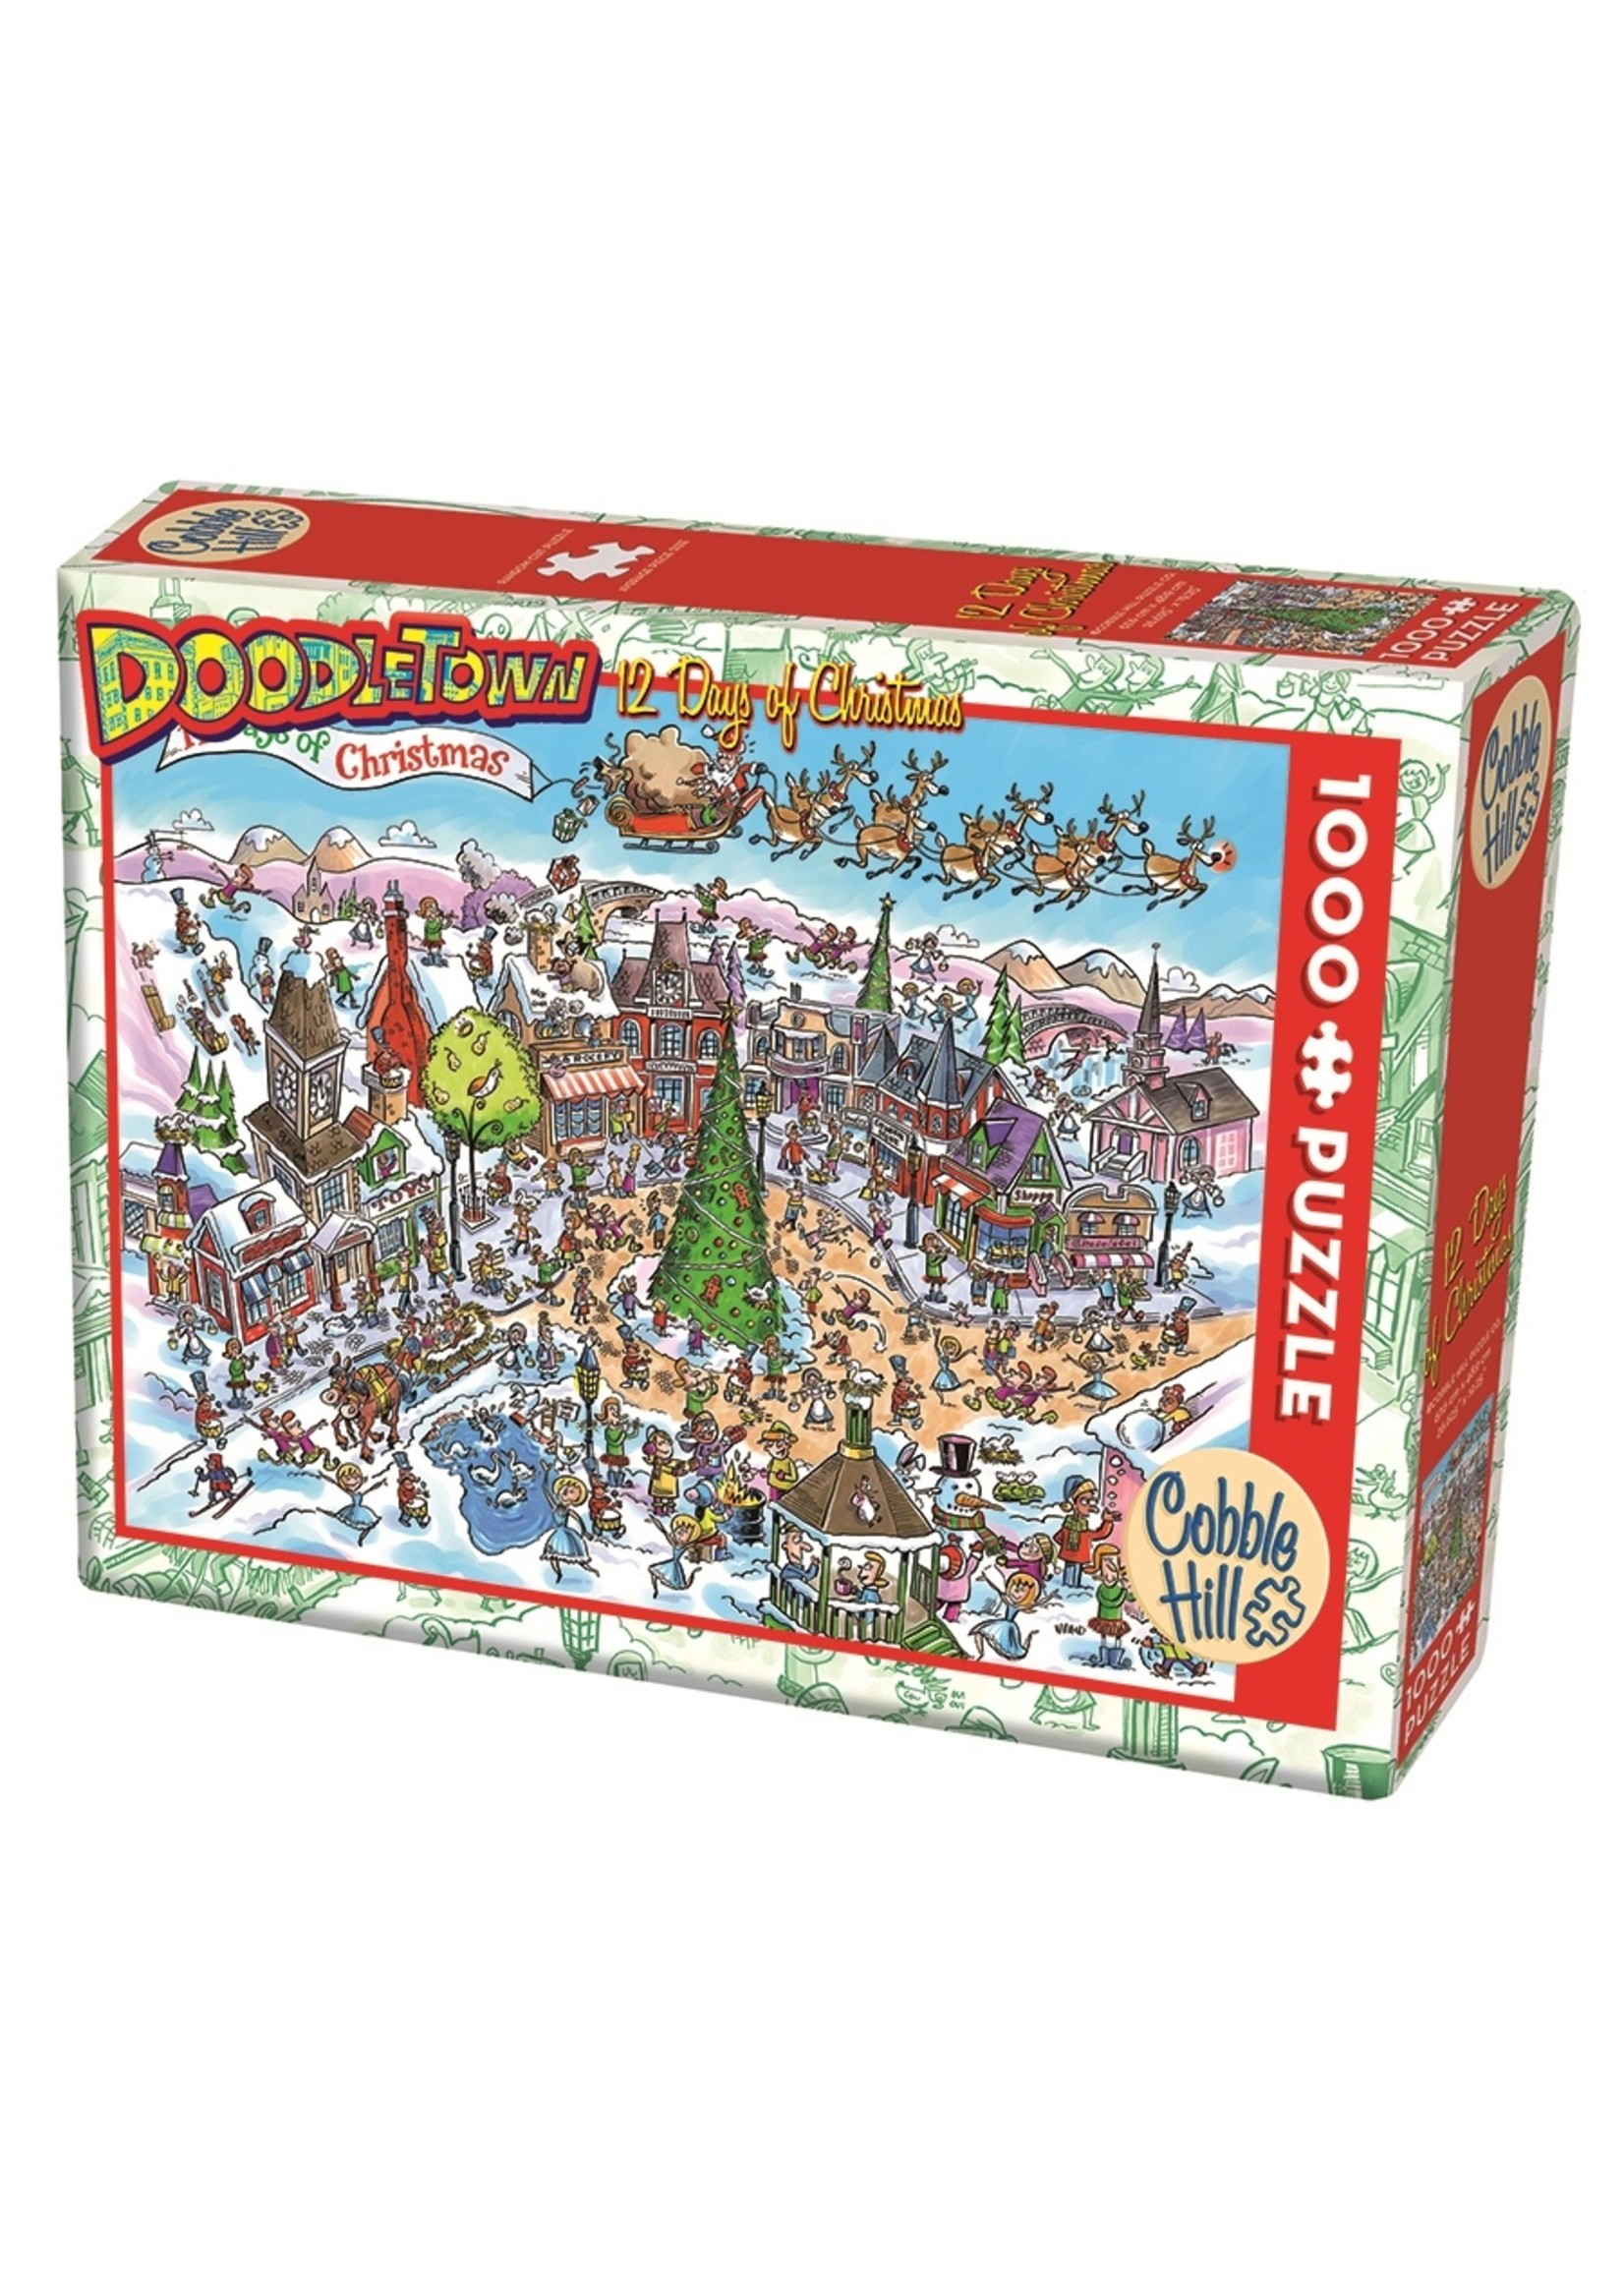 Cobble Hill "Doodletown: 12 days of Christmas" 1000 Piece Puzzle